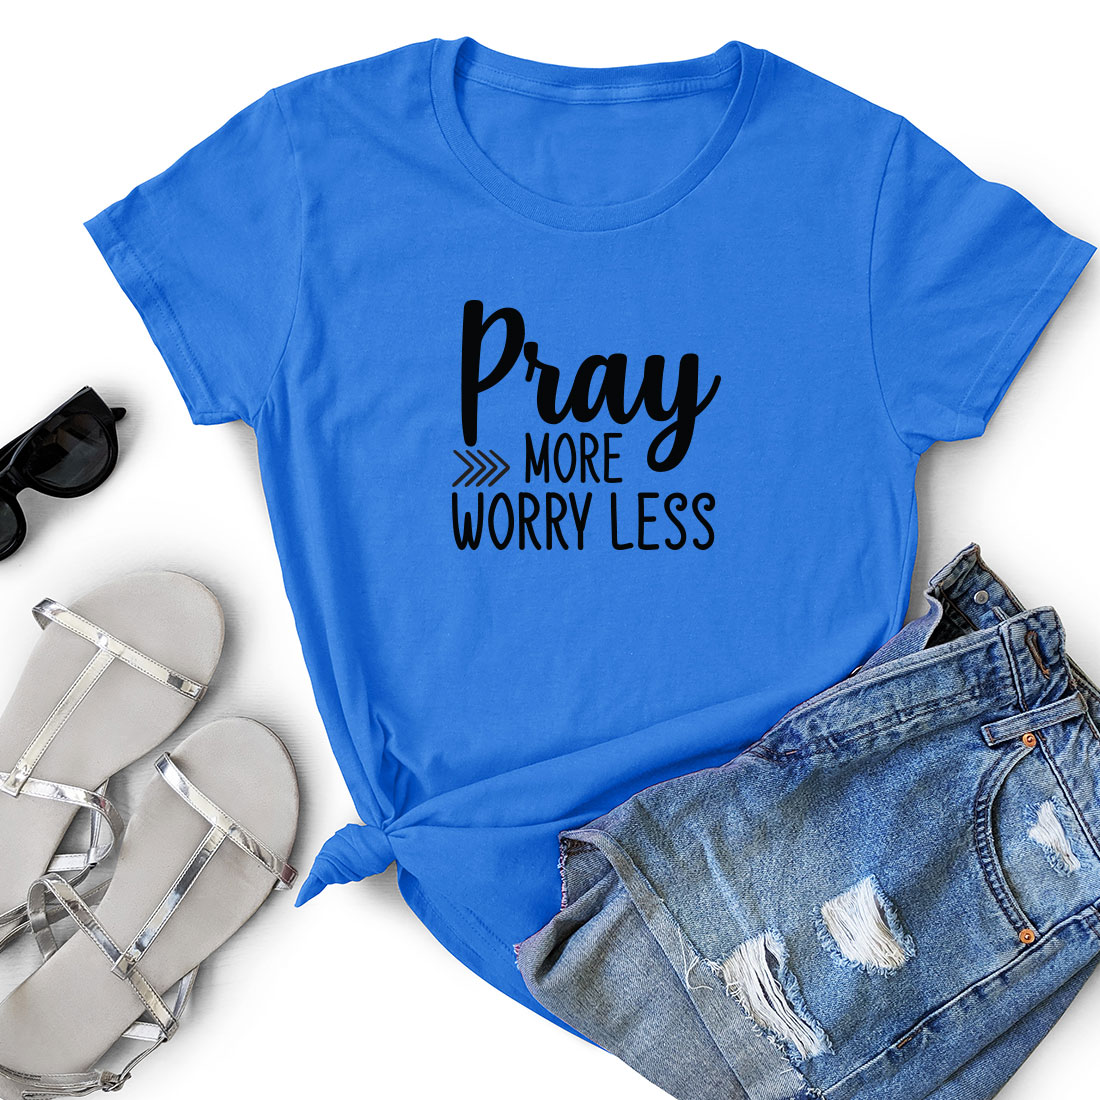 T - shirt that says pray more worry less.